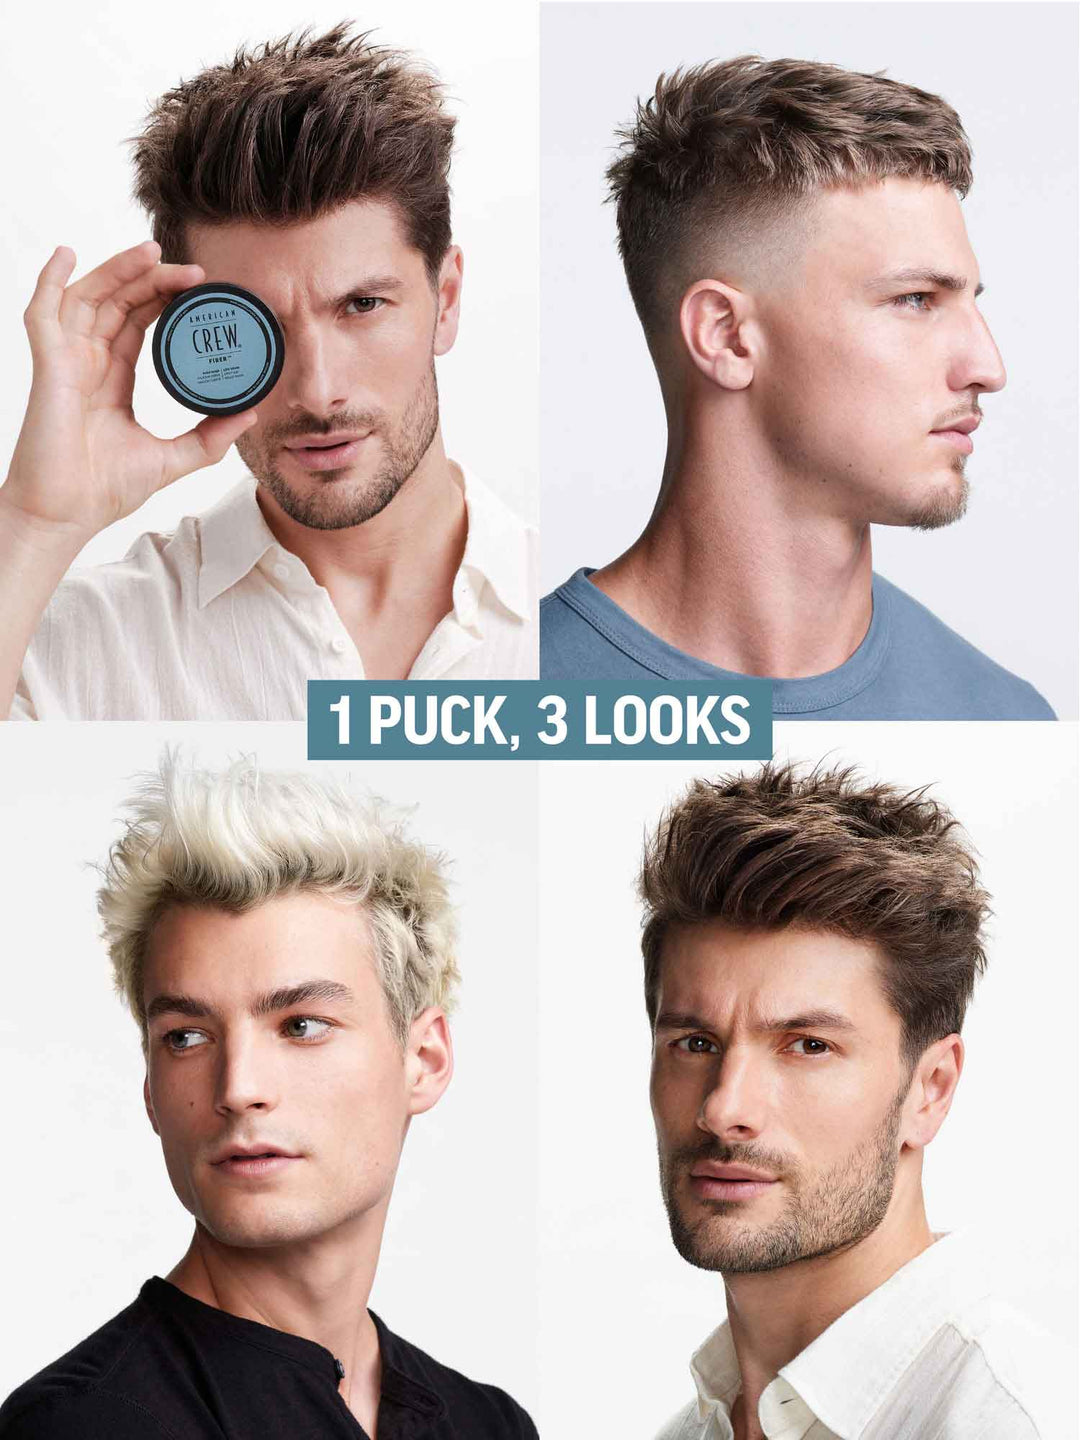 Fix Your Lid High Hold Styling Fiber Hair Pomade - Trial Size